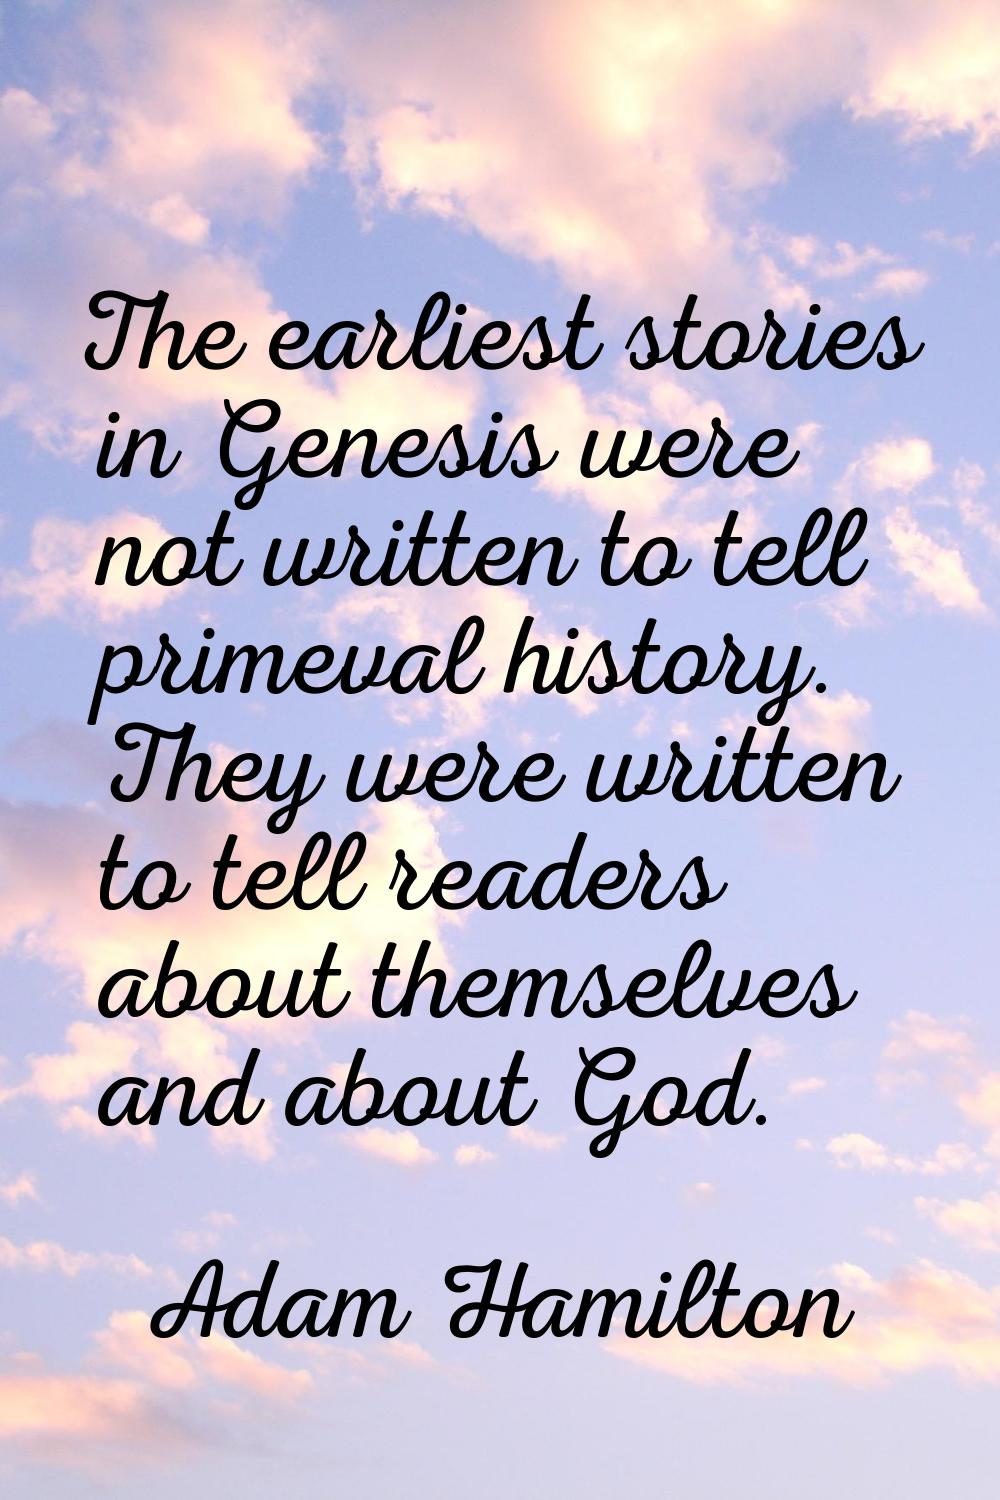 The earliest stories in Genesis were not written to tell primeval history. They were written to tel